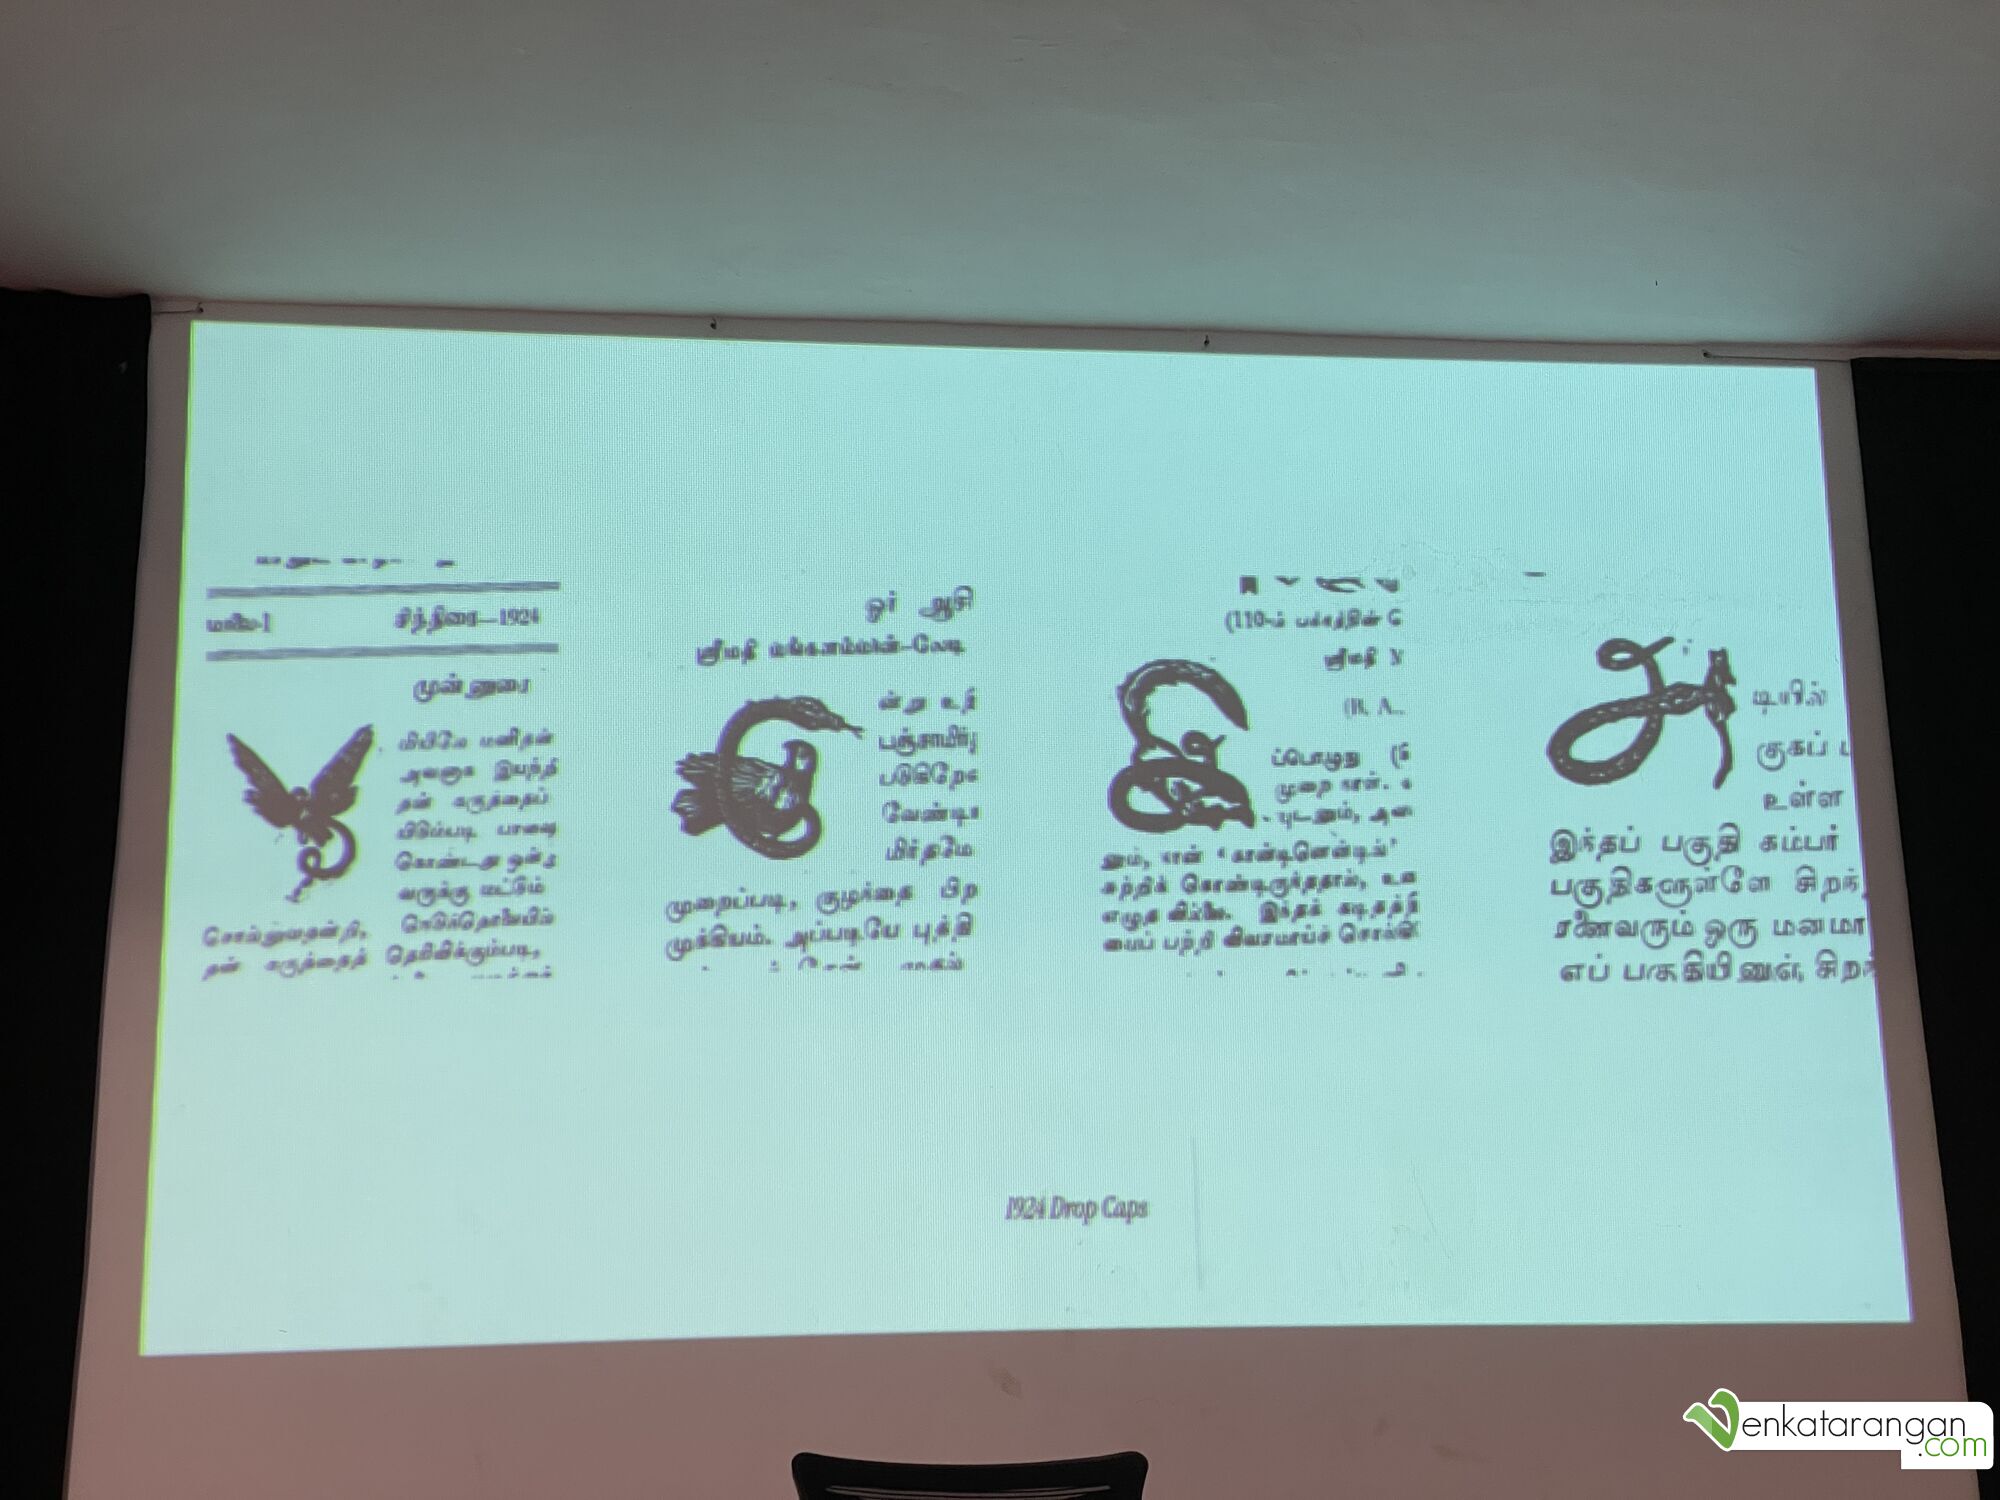 Mr. Tharique Azeez - Drawing of images in place of glyphs for Drop case text